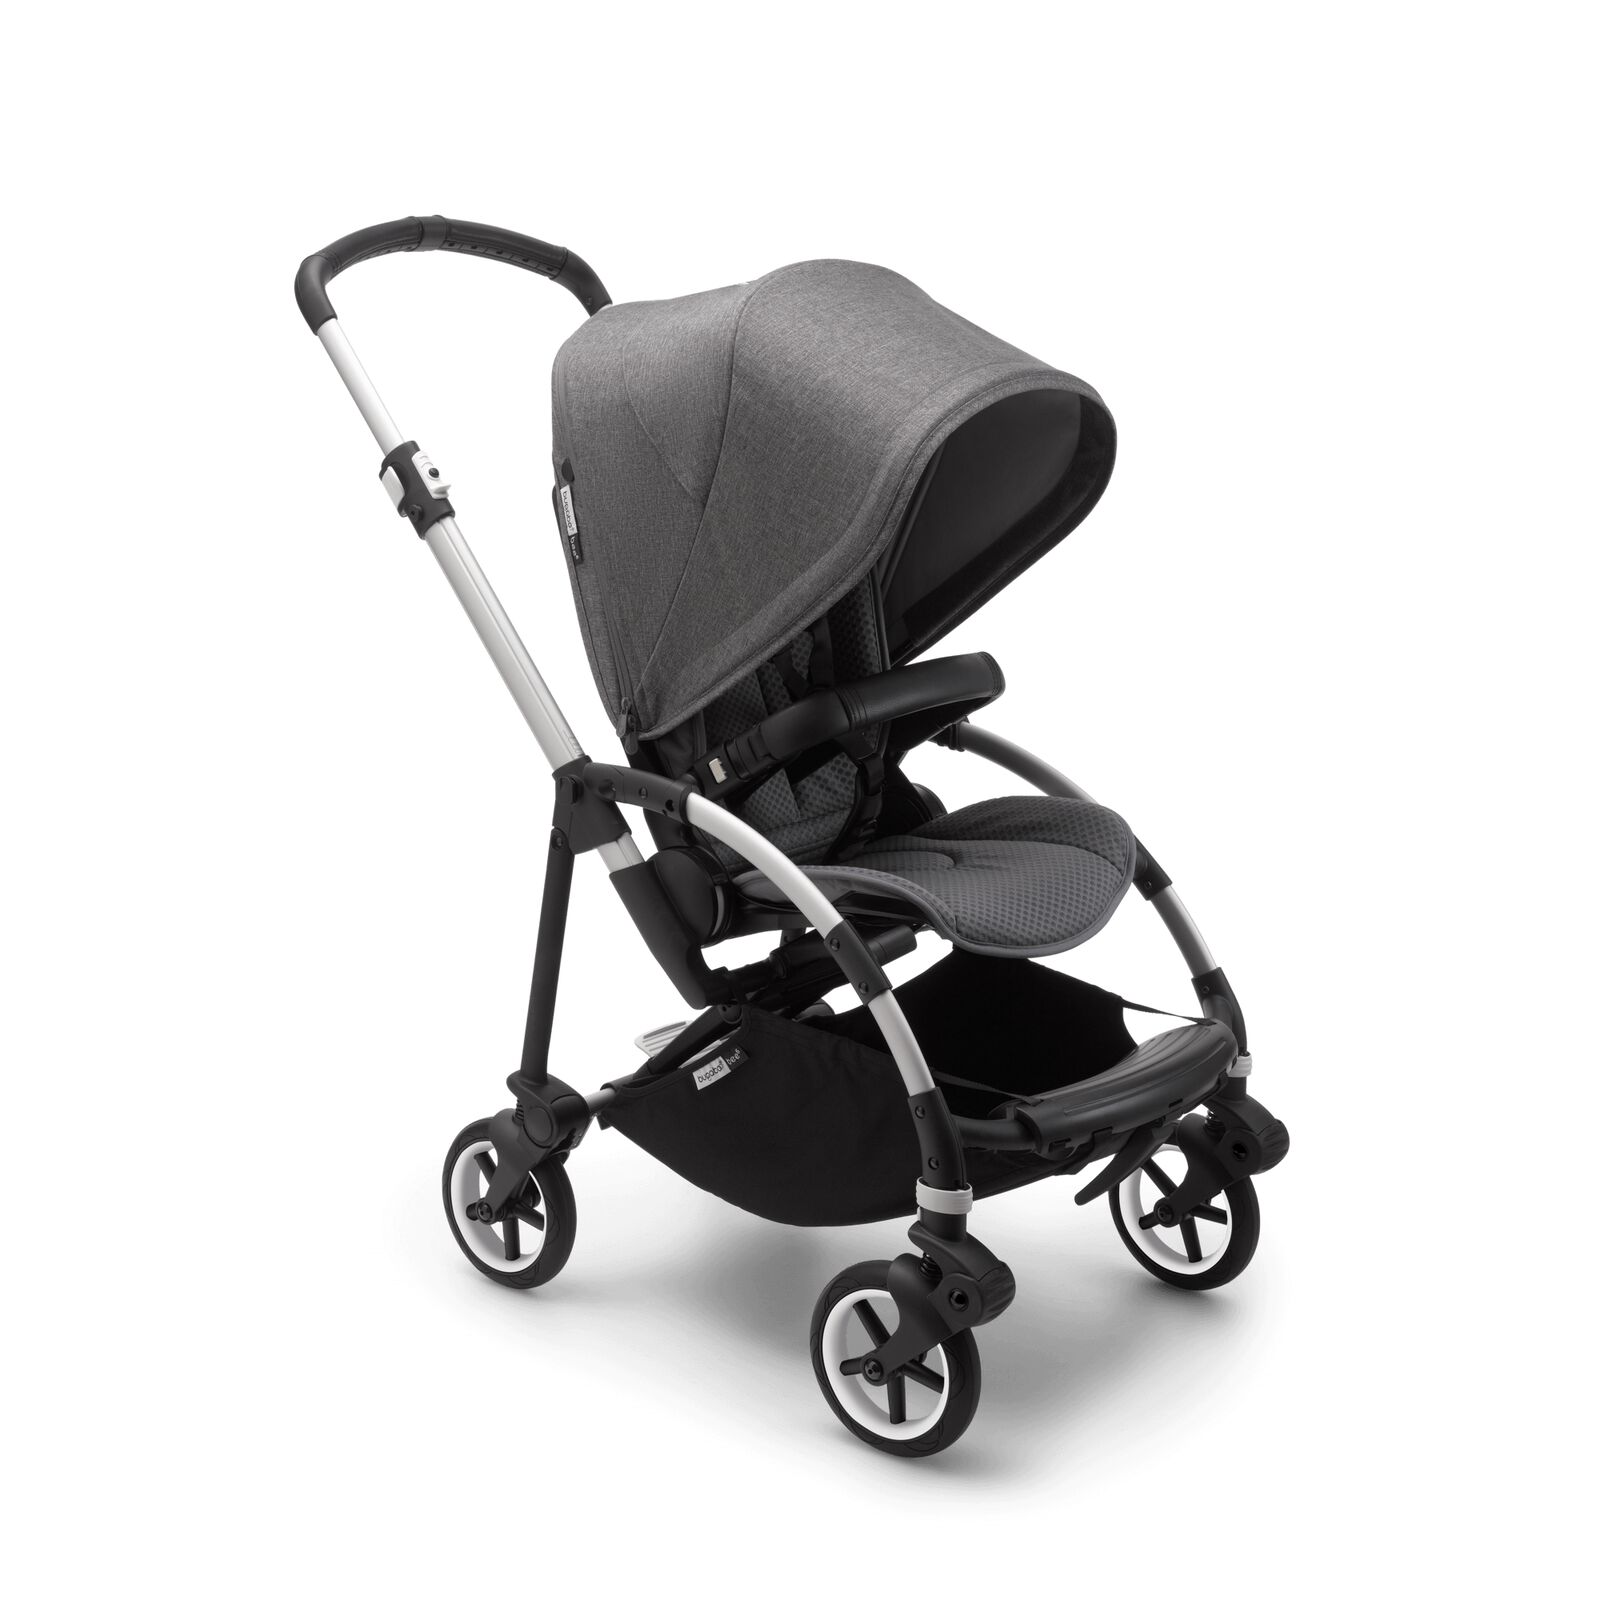 Bugaboo Bee 6 seat and bassinet stroller - View 1